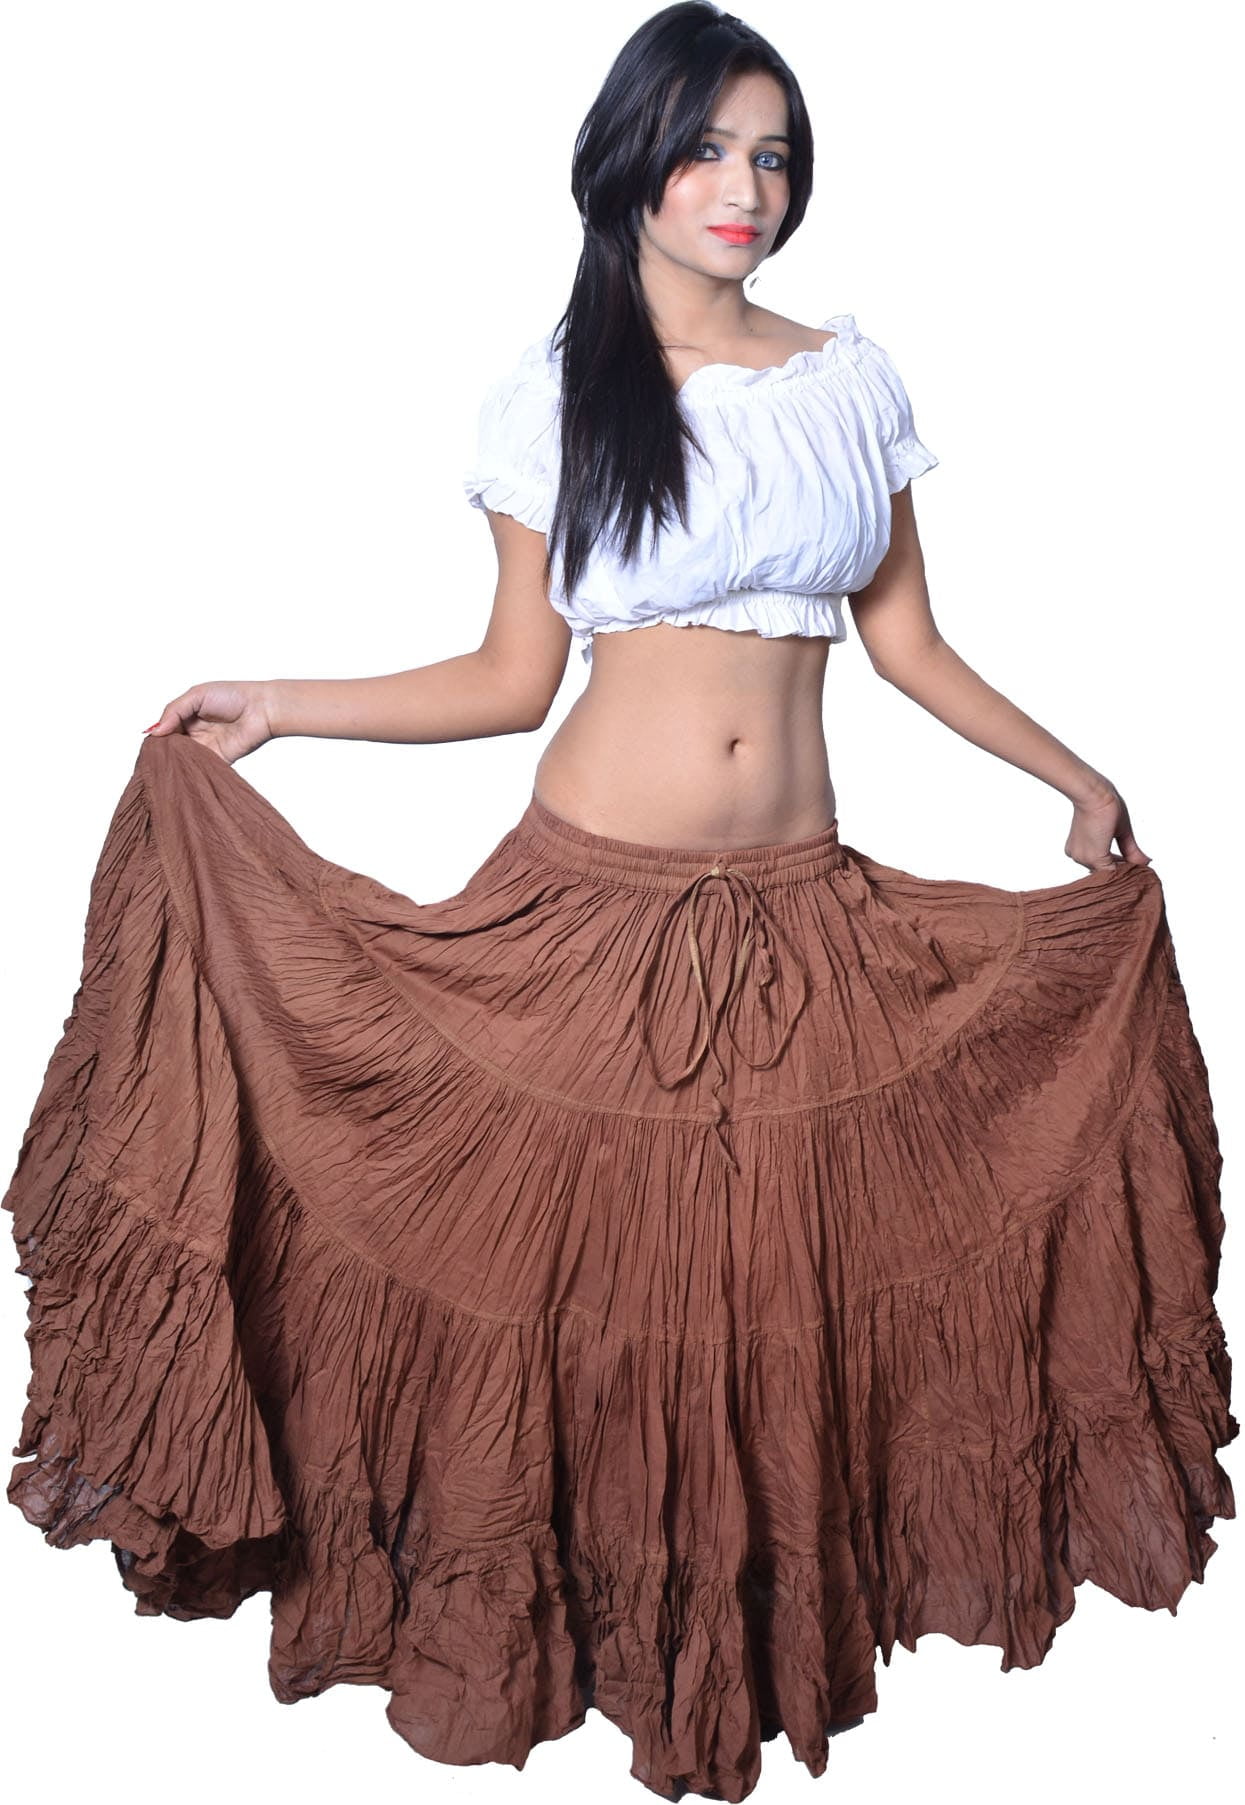 Wevez Women's Gypsy 25 Yard Solid Color Cotton Skirt, One Size - Walmart.com